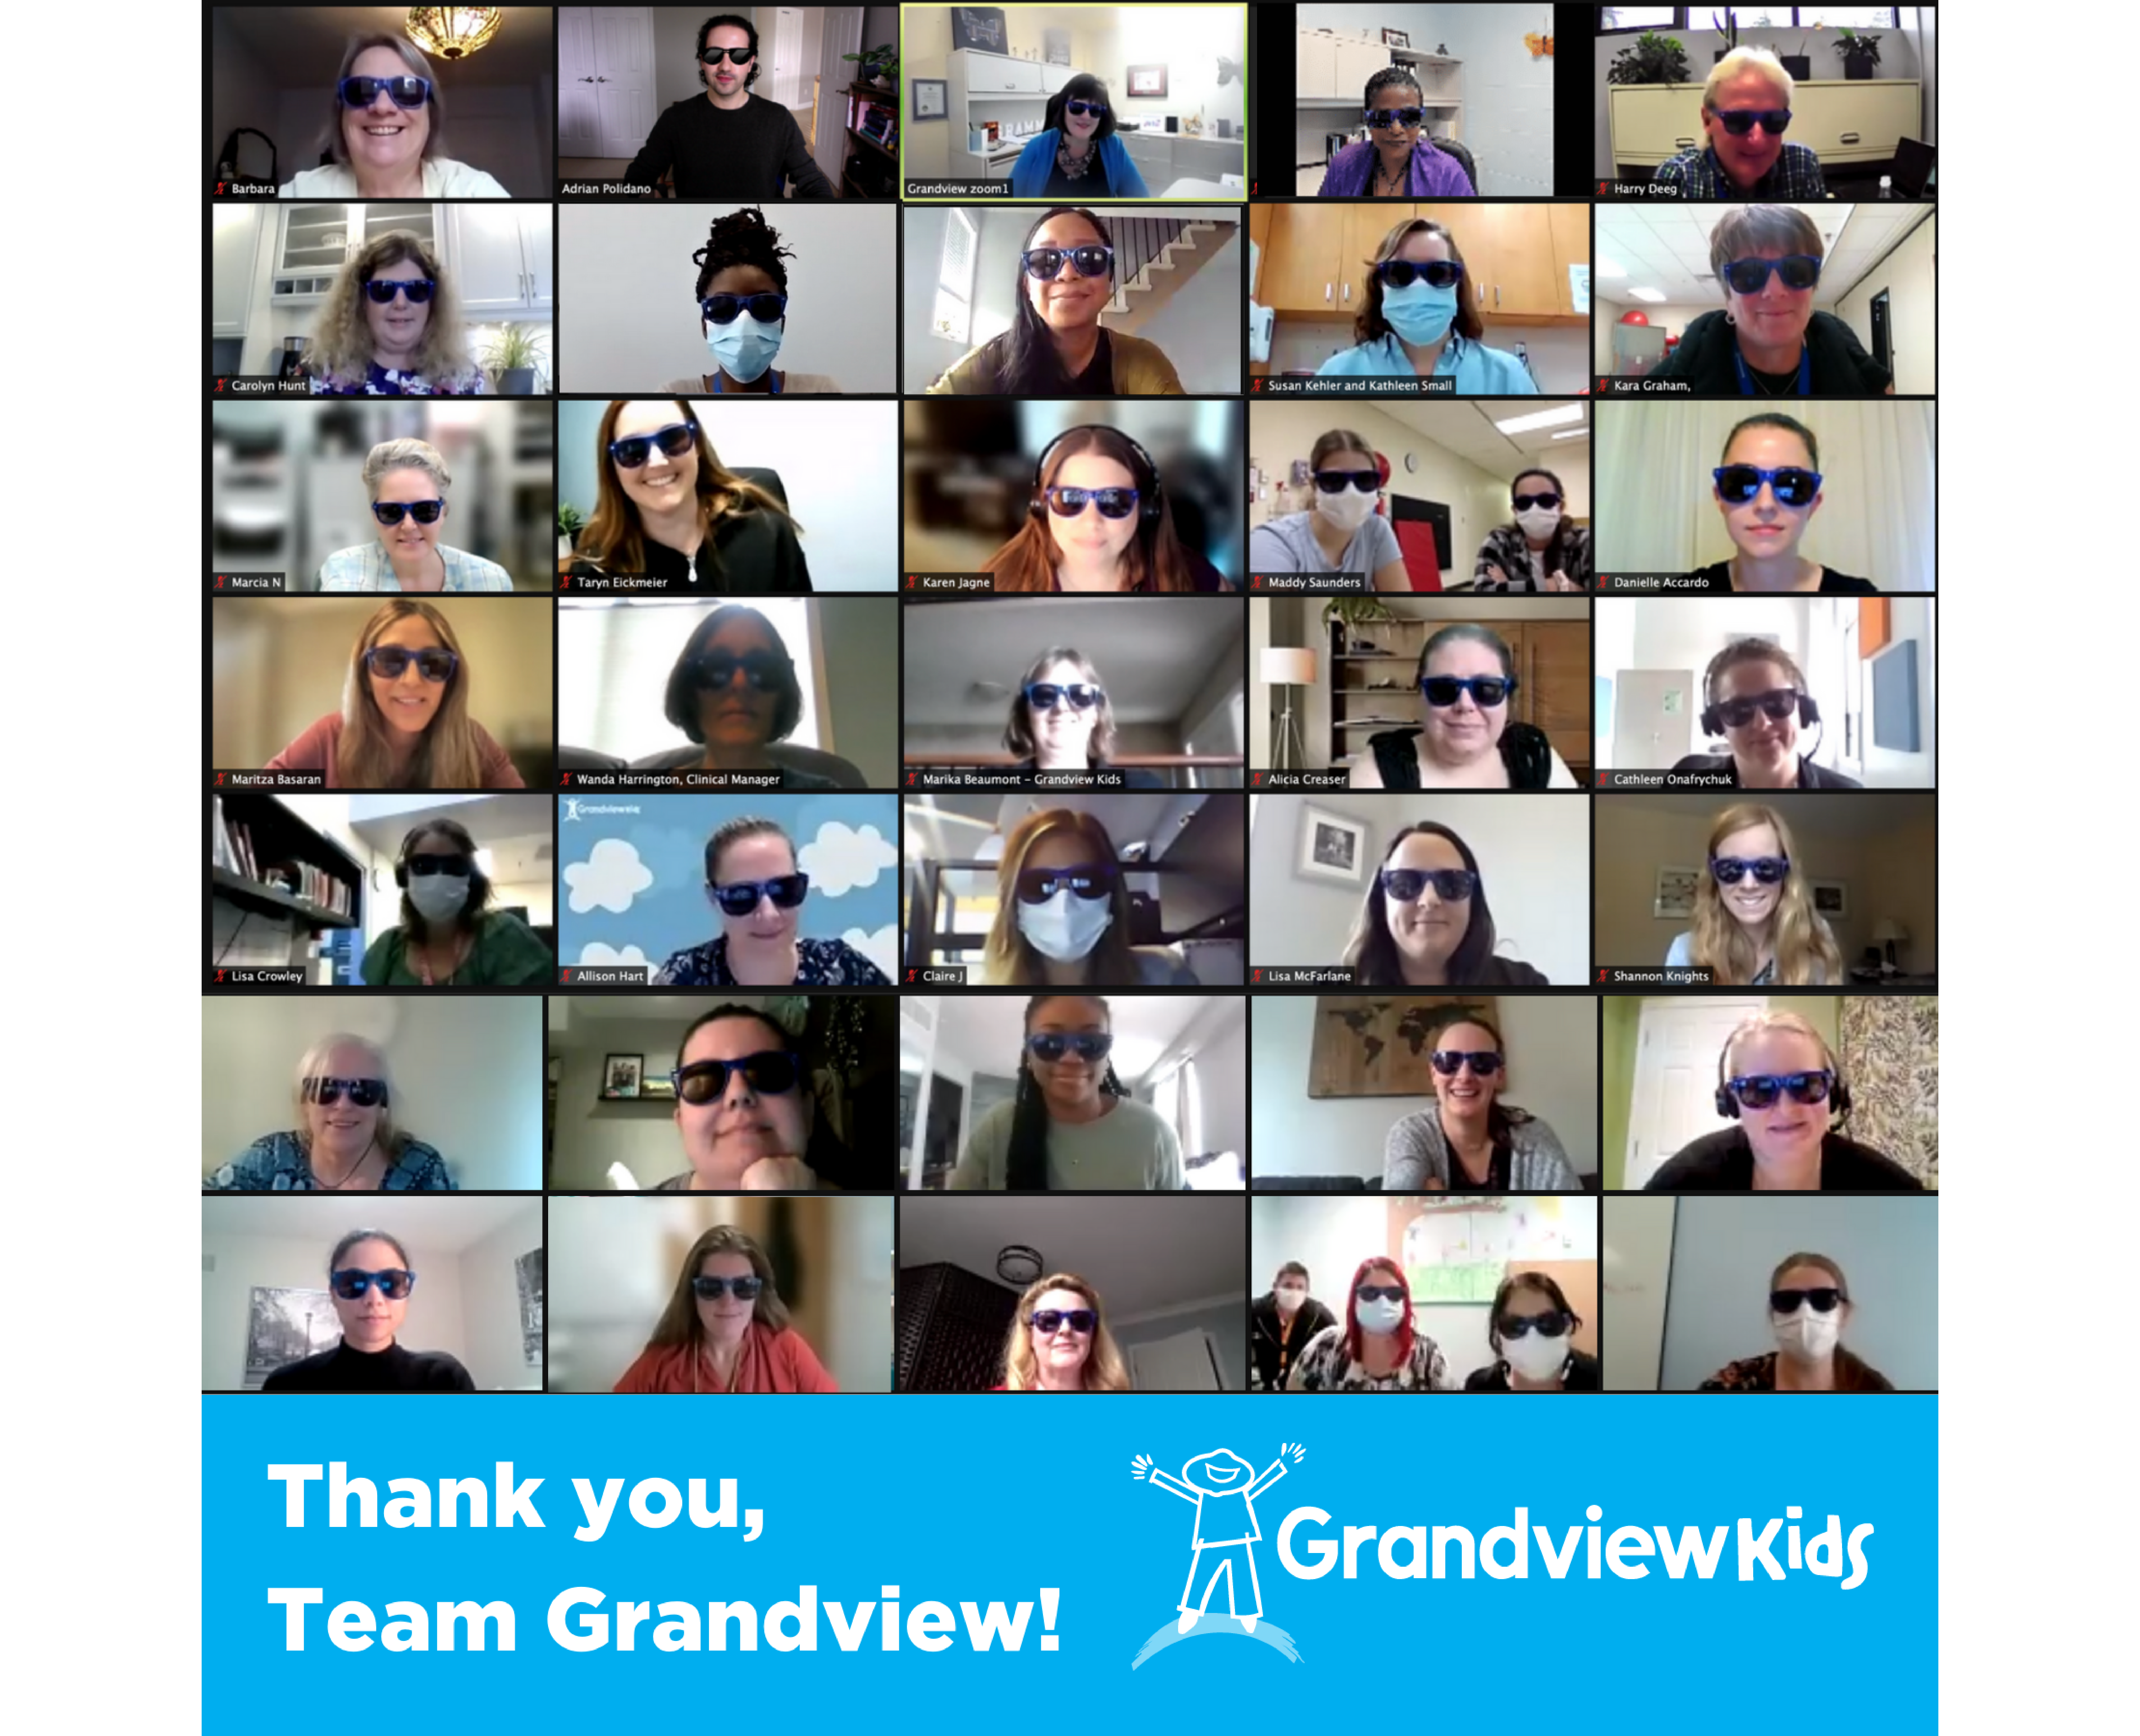 A screenshot showing Team Grandview members on Zoom, wearing sunglasses as part of the Mission Possible Accreditation Event.